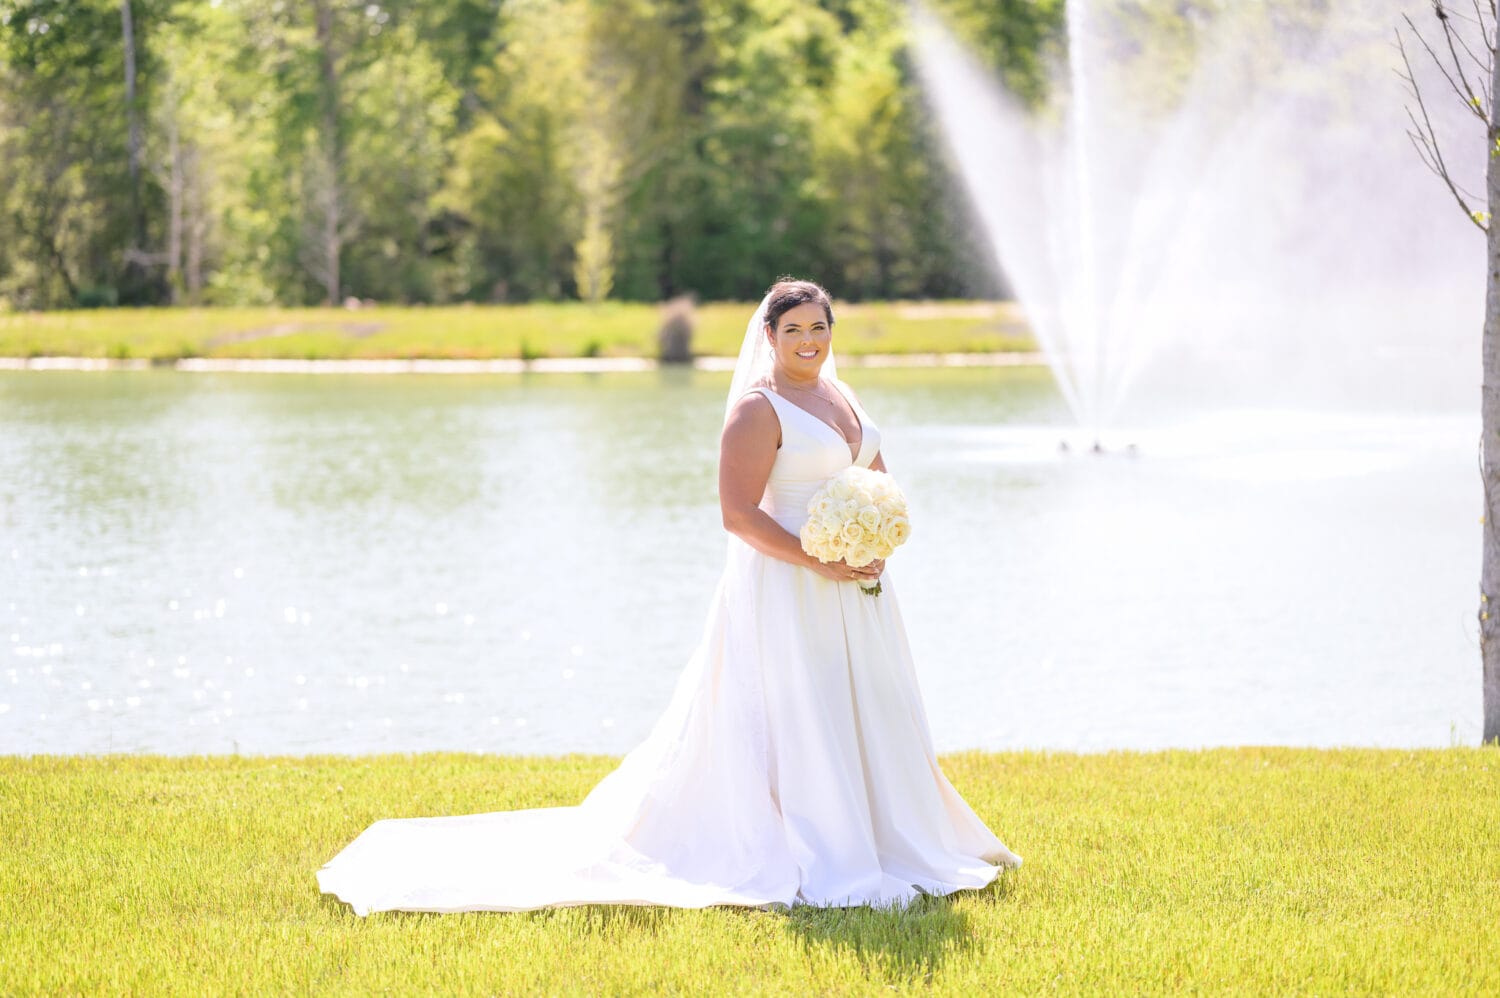 Portraits of the bride by the fountain - The Venue at White Oaks Farm